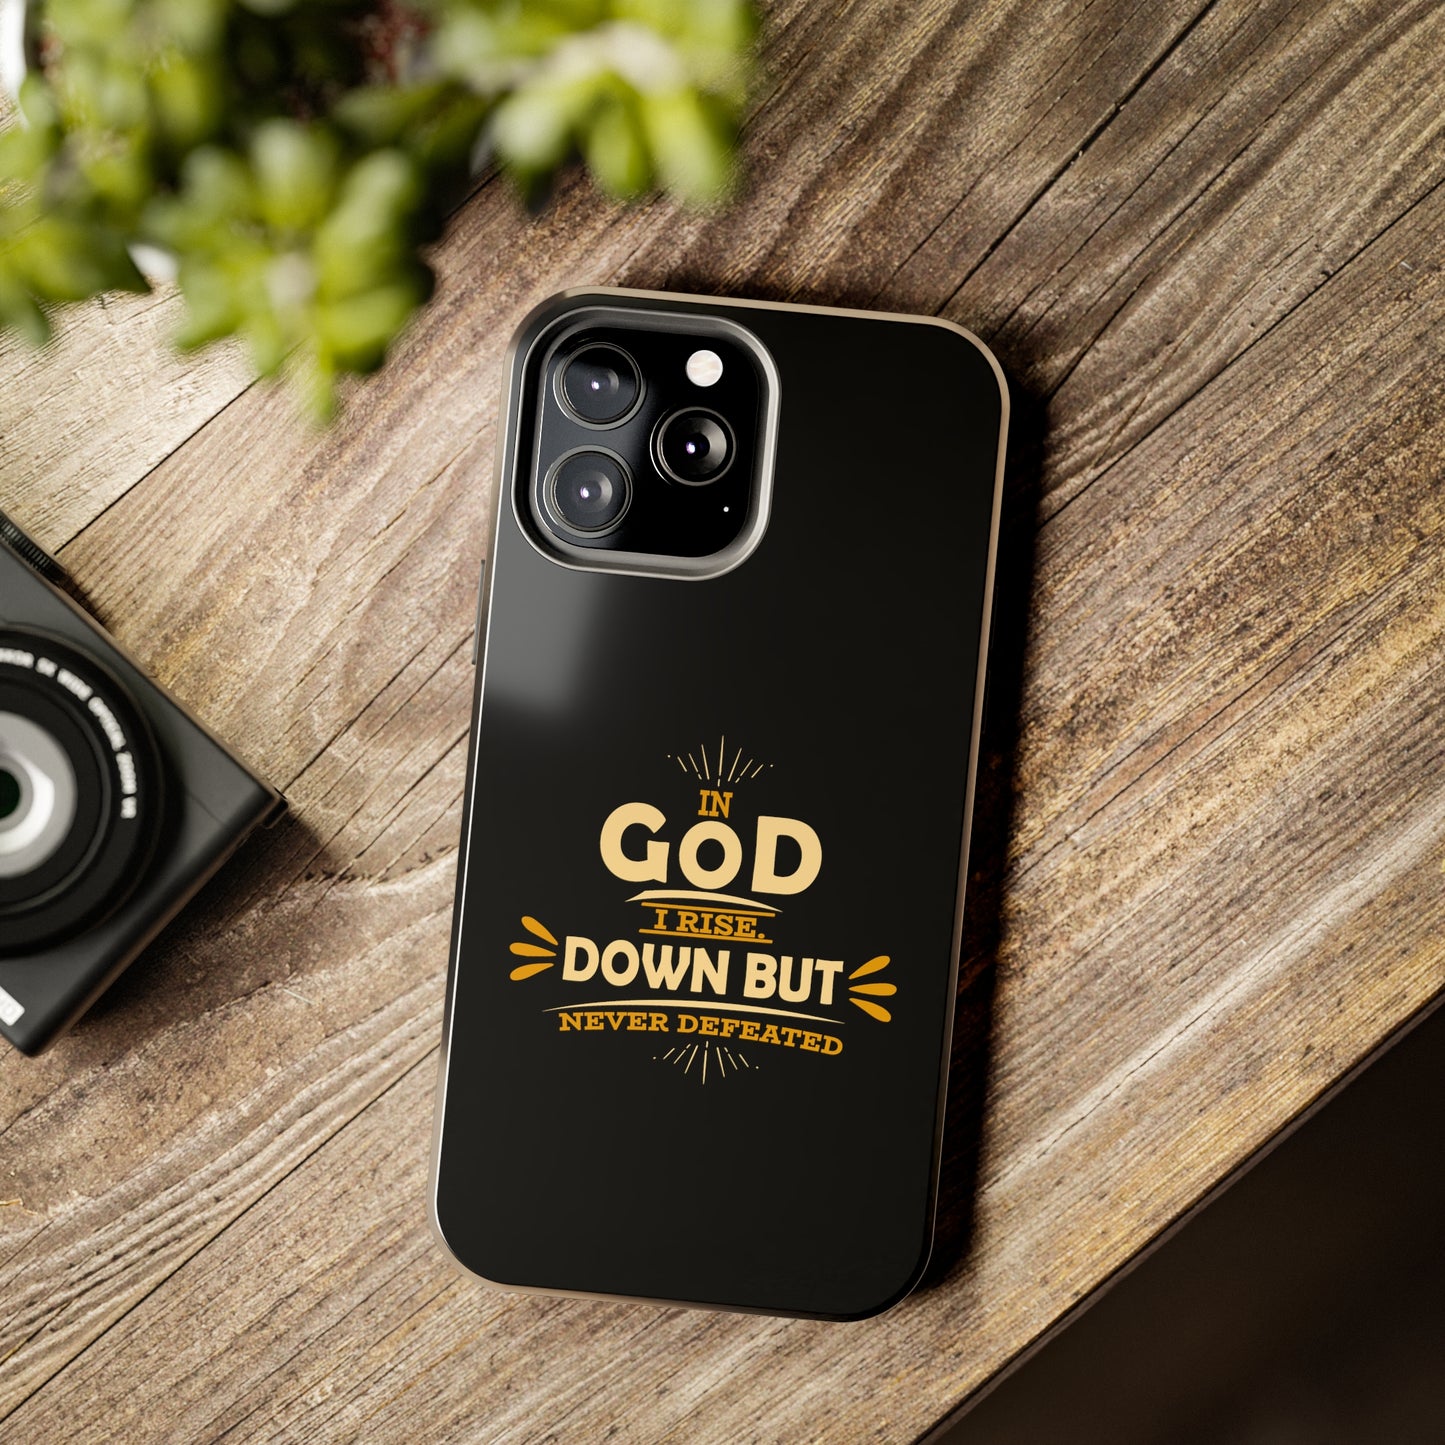 In God I Rise Down But Never Defeated  Tough Phone Cases, Case-Mate